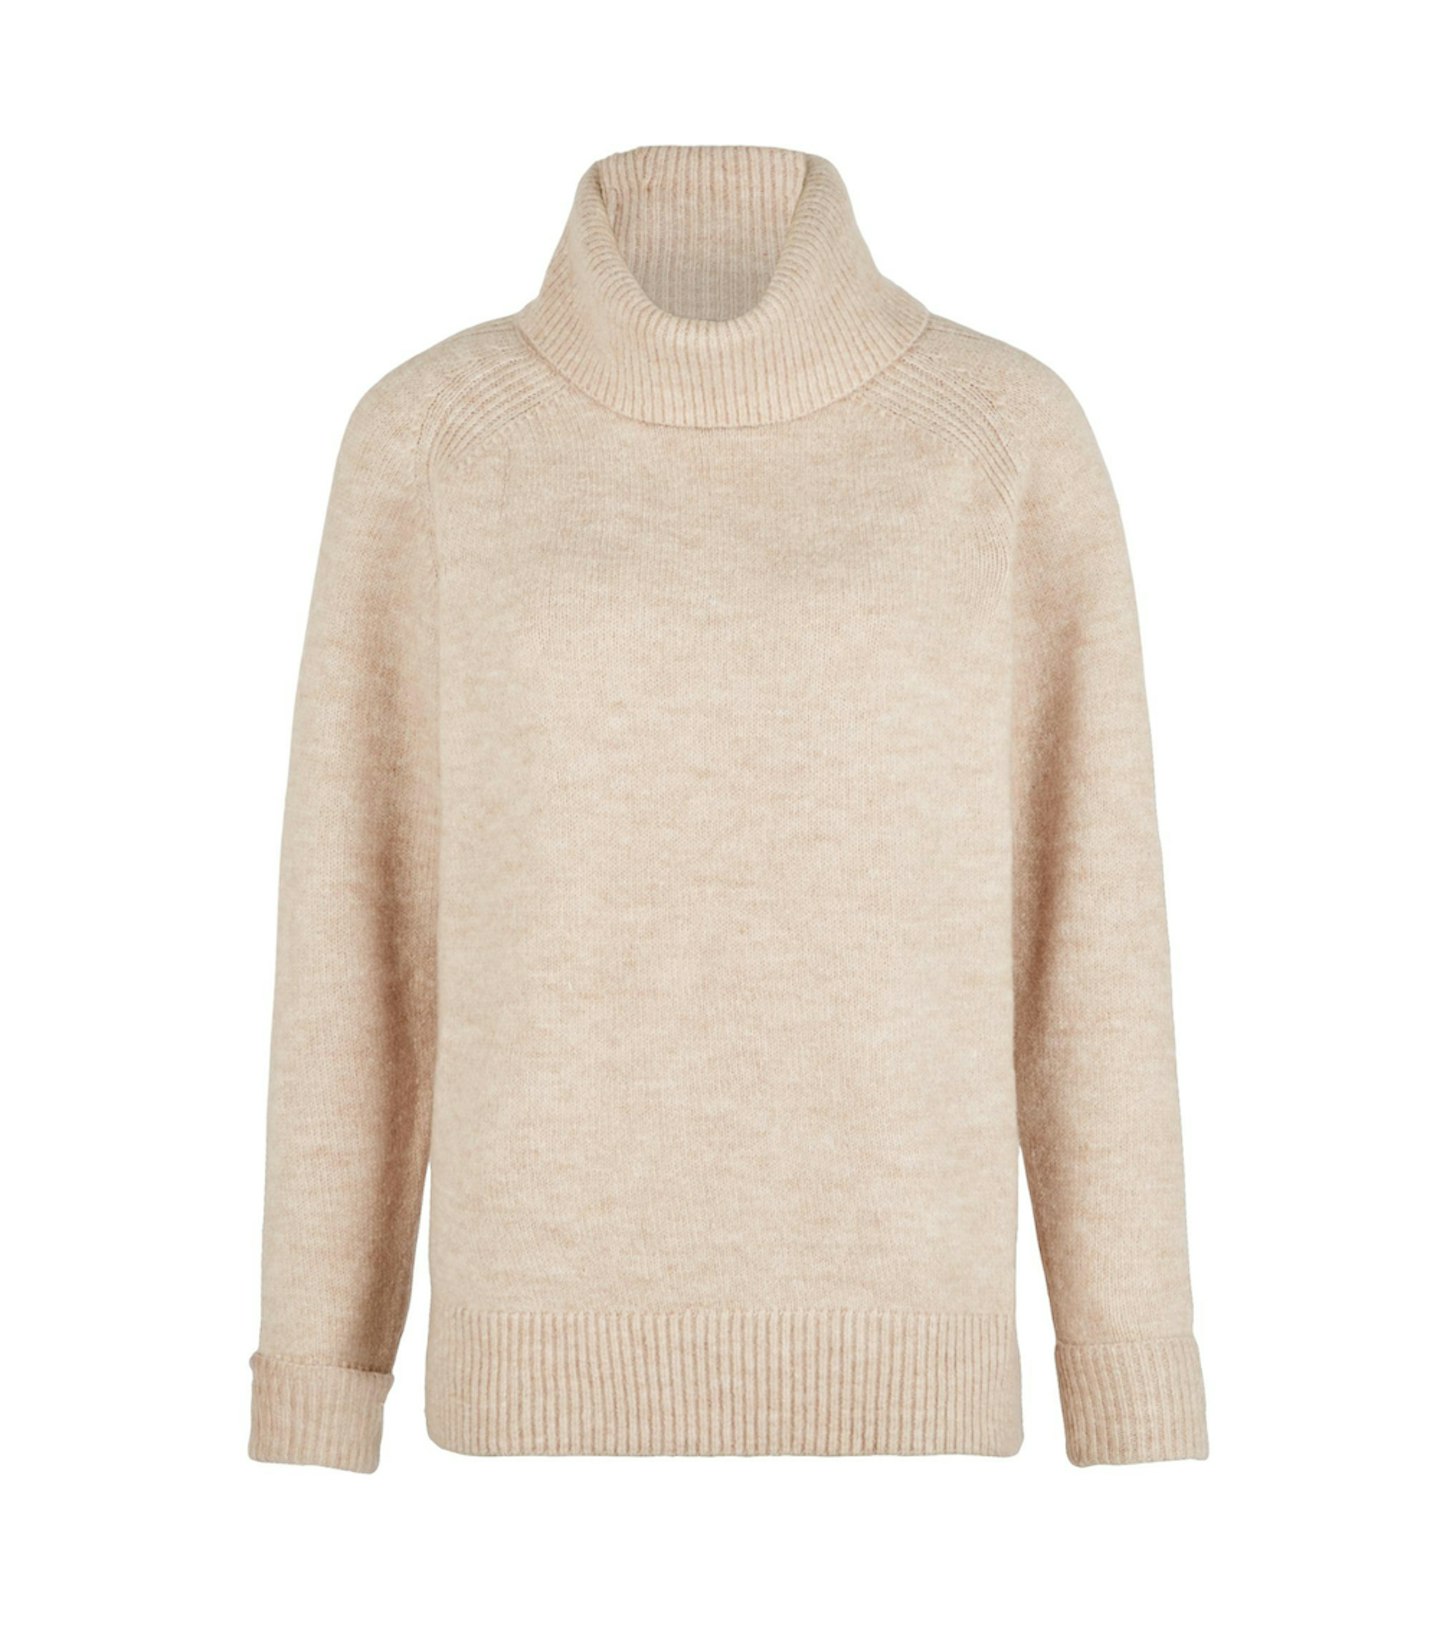 Millie Mackintosh X Very Knitted Roll Neck Turn Back Cuff Wide Sleeve Jumper - Oatmeal